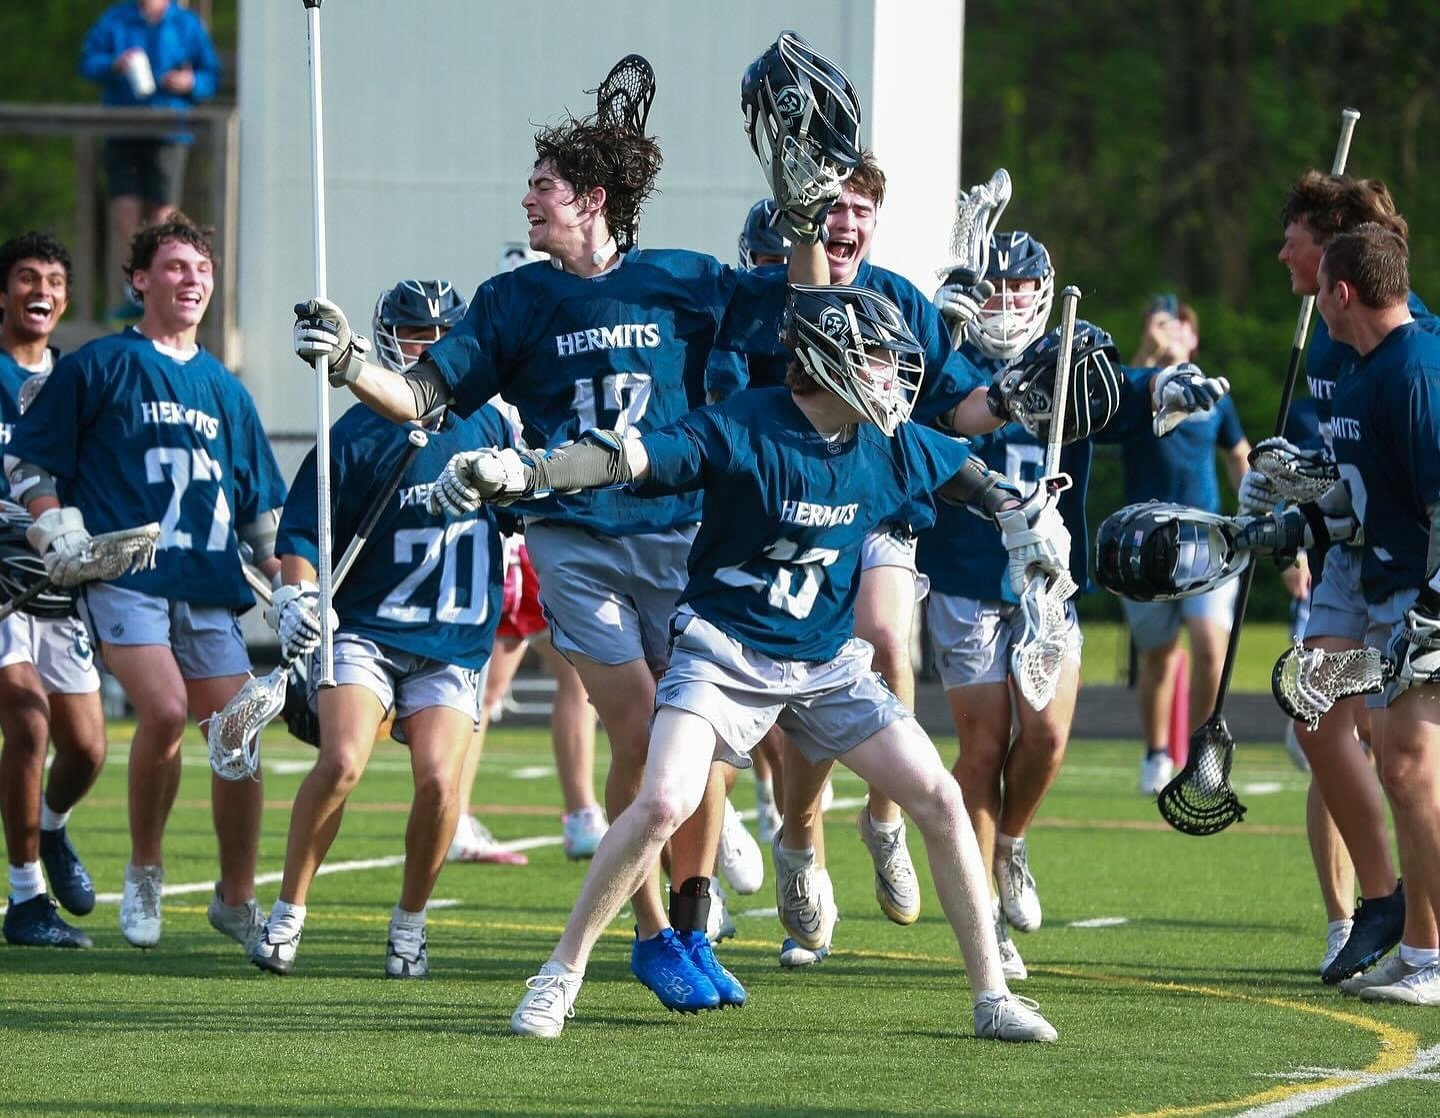 When you&rsquo;ve got Friday off thanks to a Head of School holiday&hellip; 🙌

Thanks for the pic assist @hermitslacrosse. 🤝

#FridayFeeling
#ThankYouFrMurray